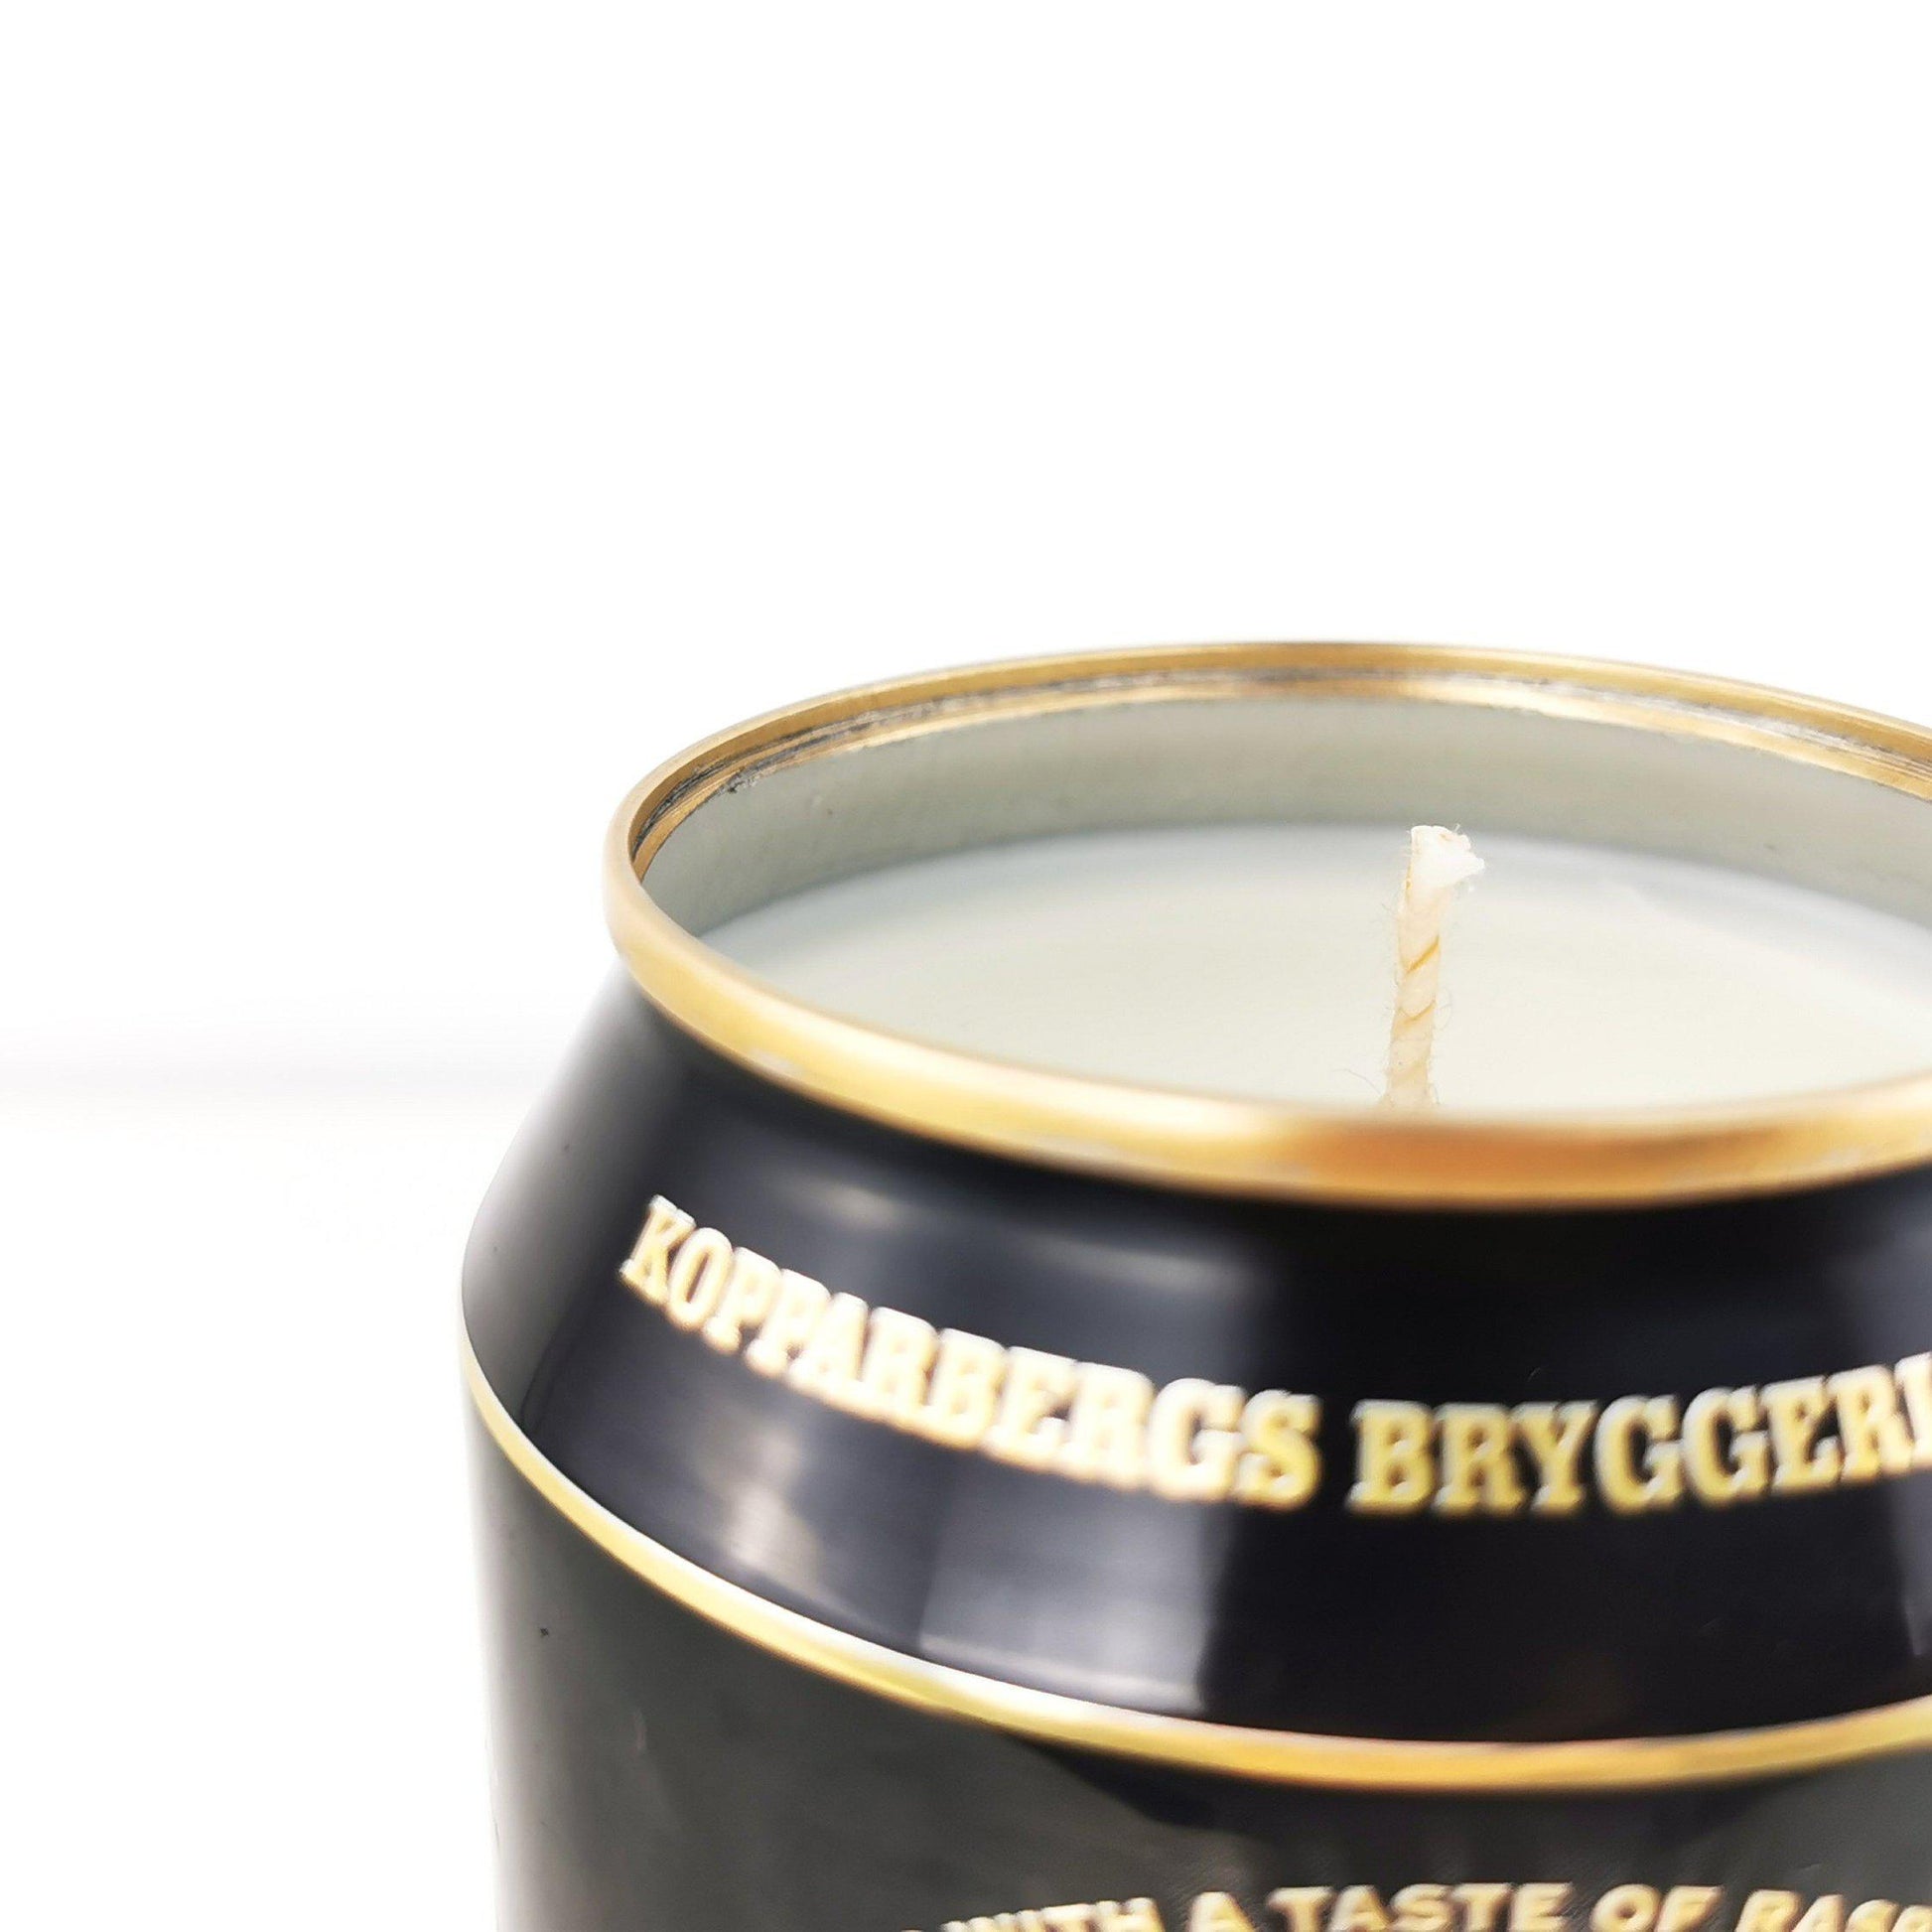 Kopparberg Mixed Fruit Cider Can Candle-Cider Can Candles-Adhock Homeware